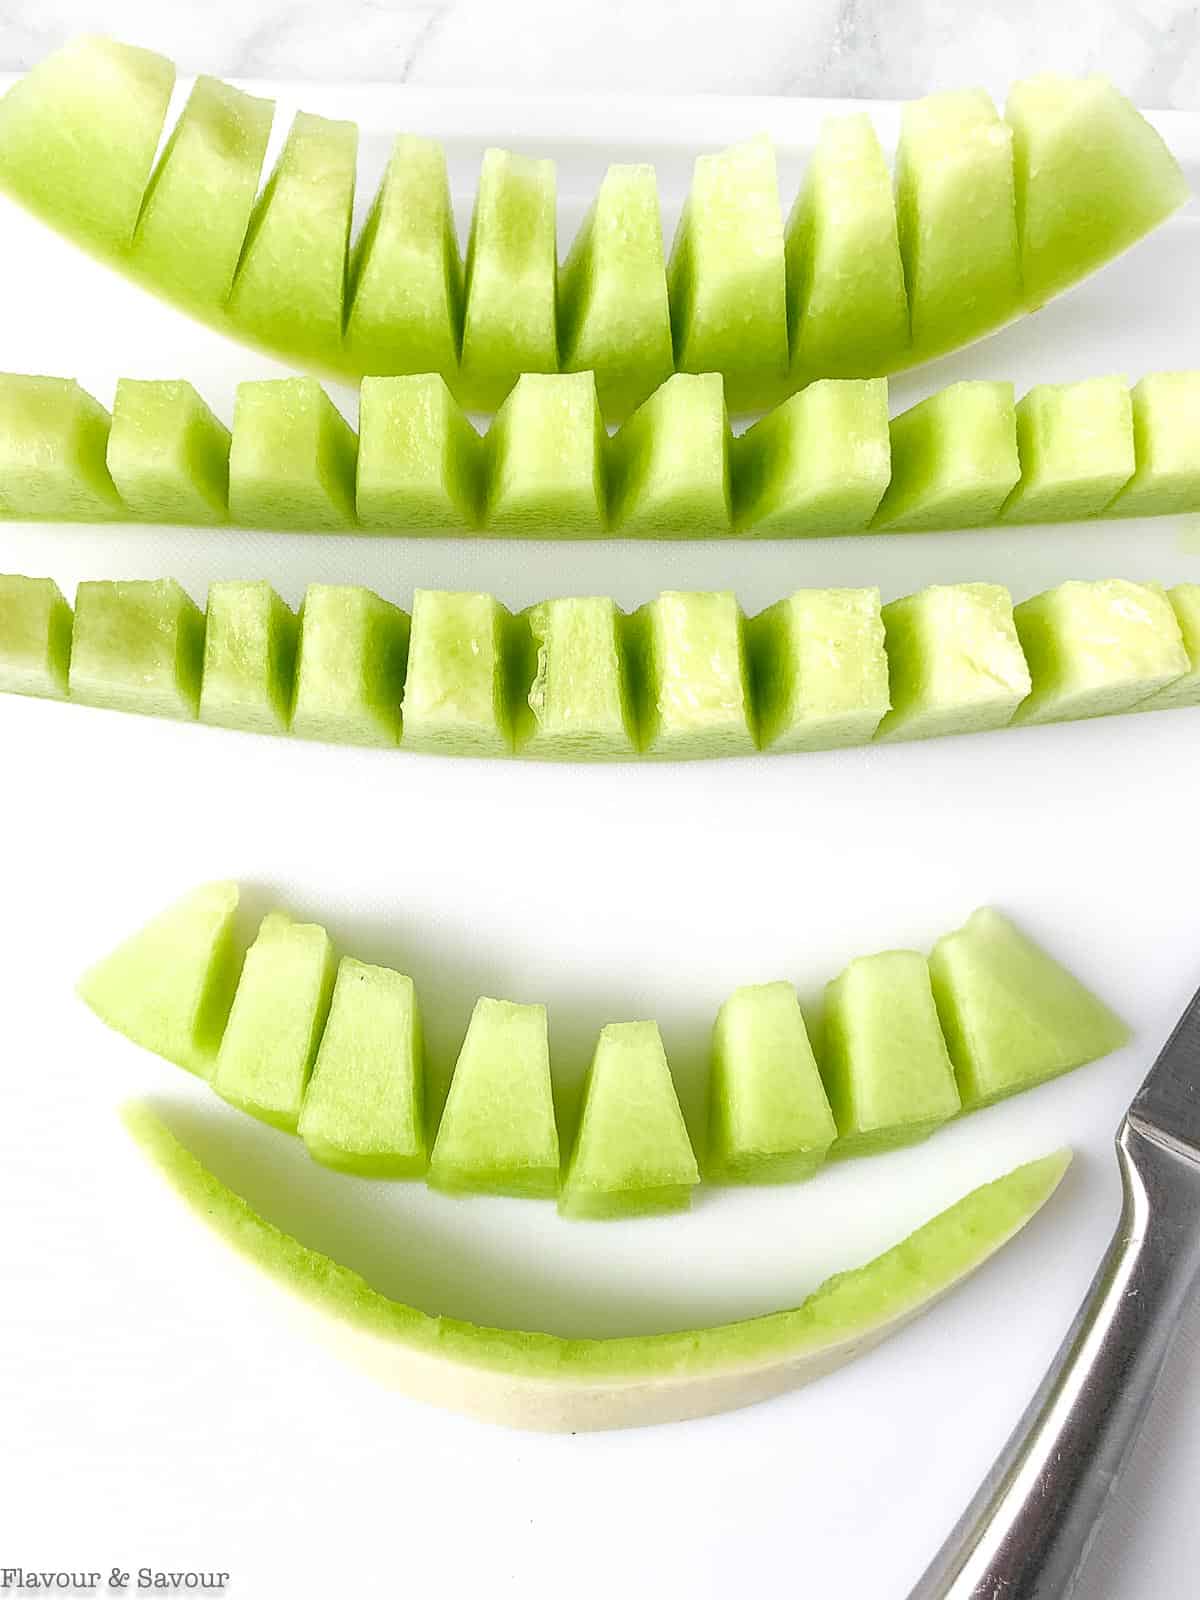 Removing rind from honeydew melon.